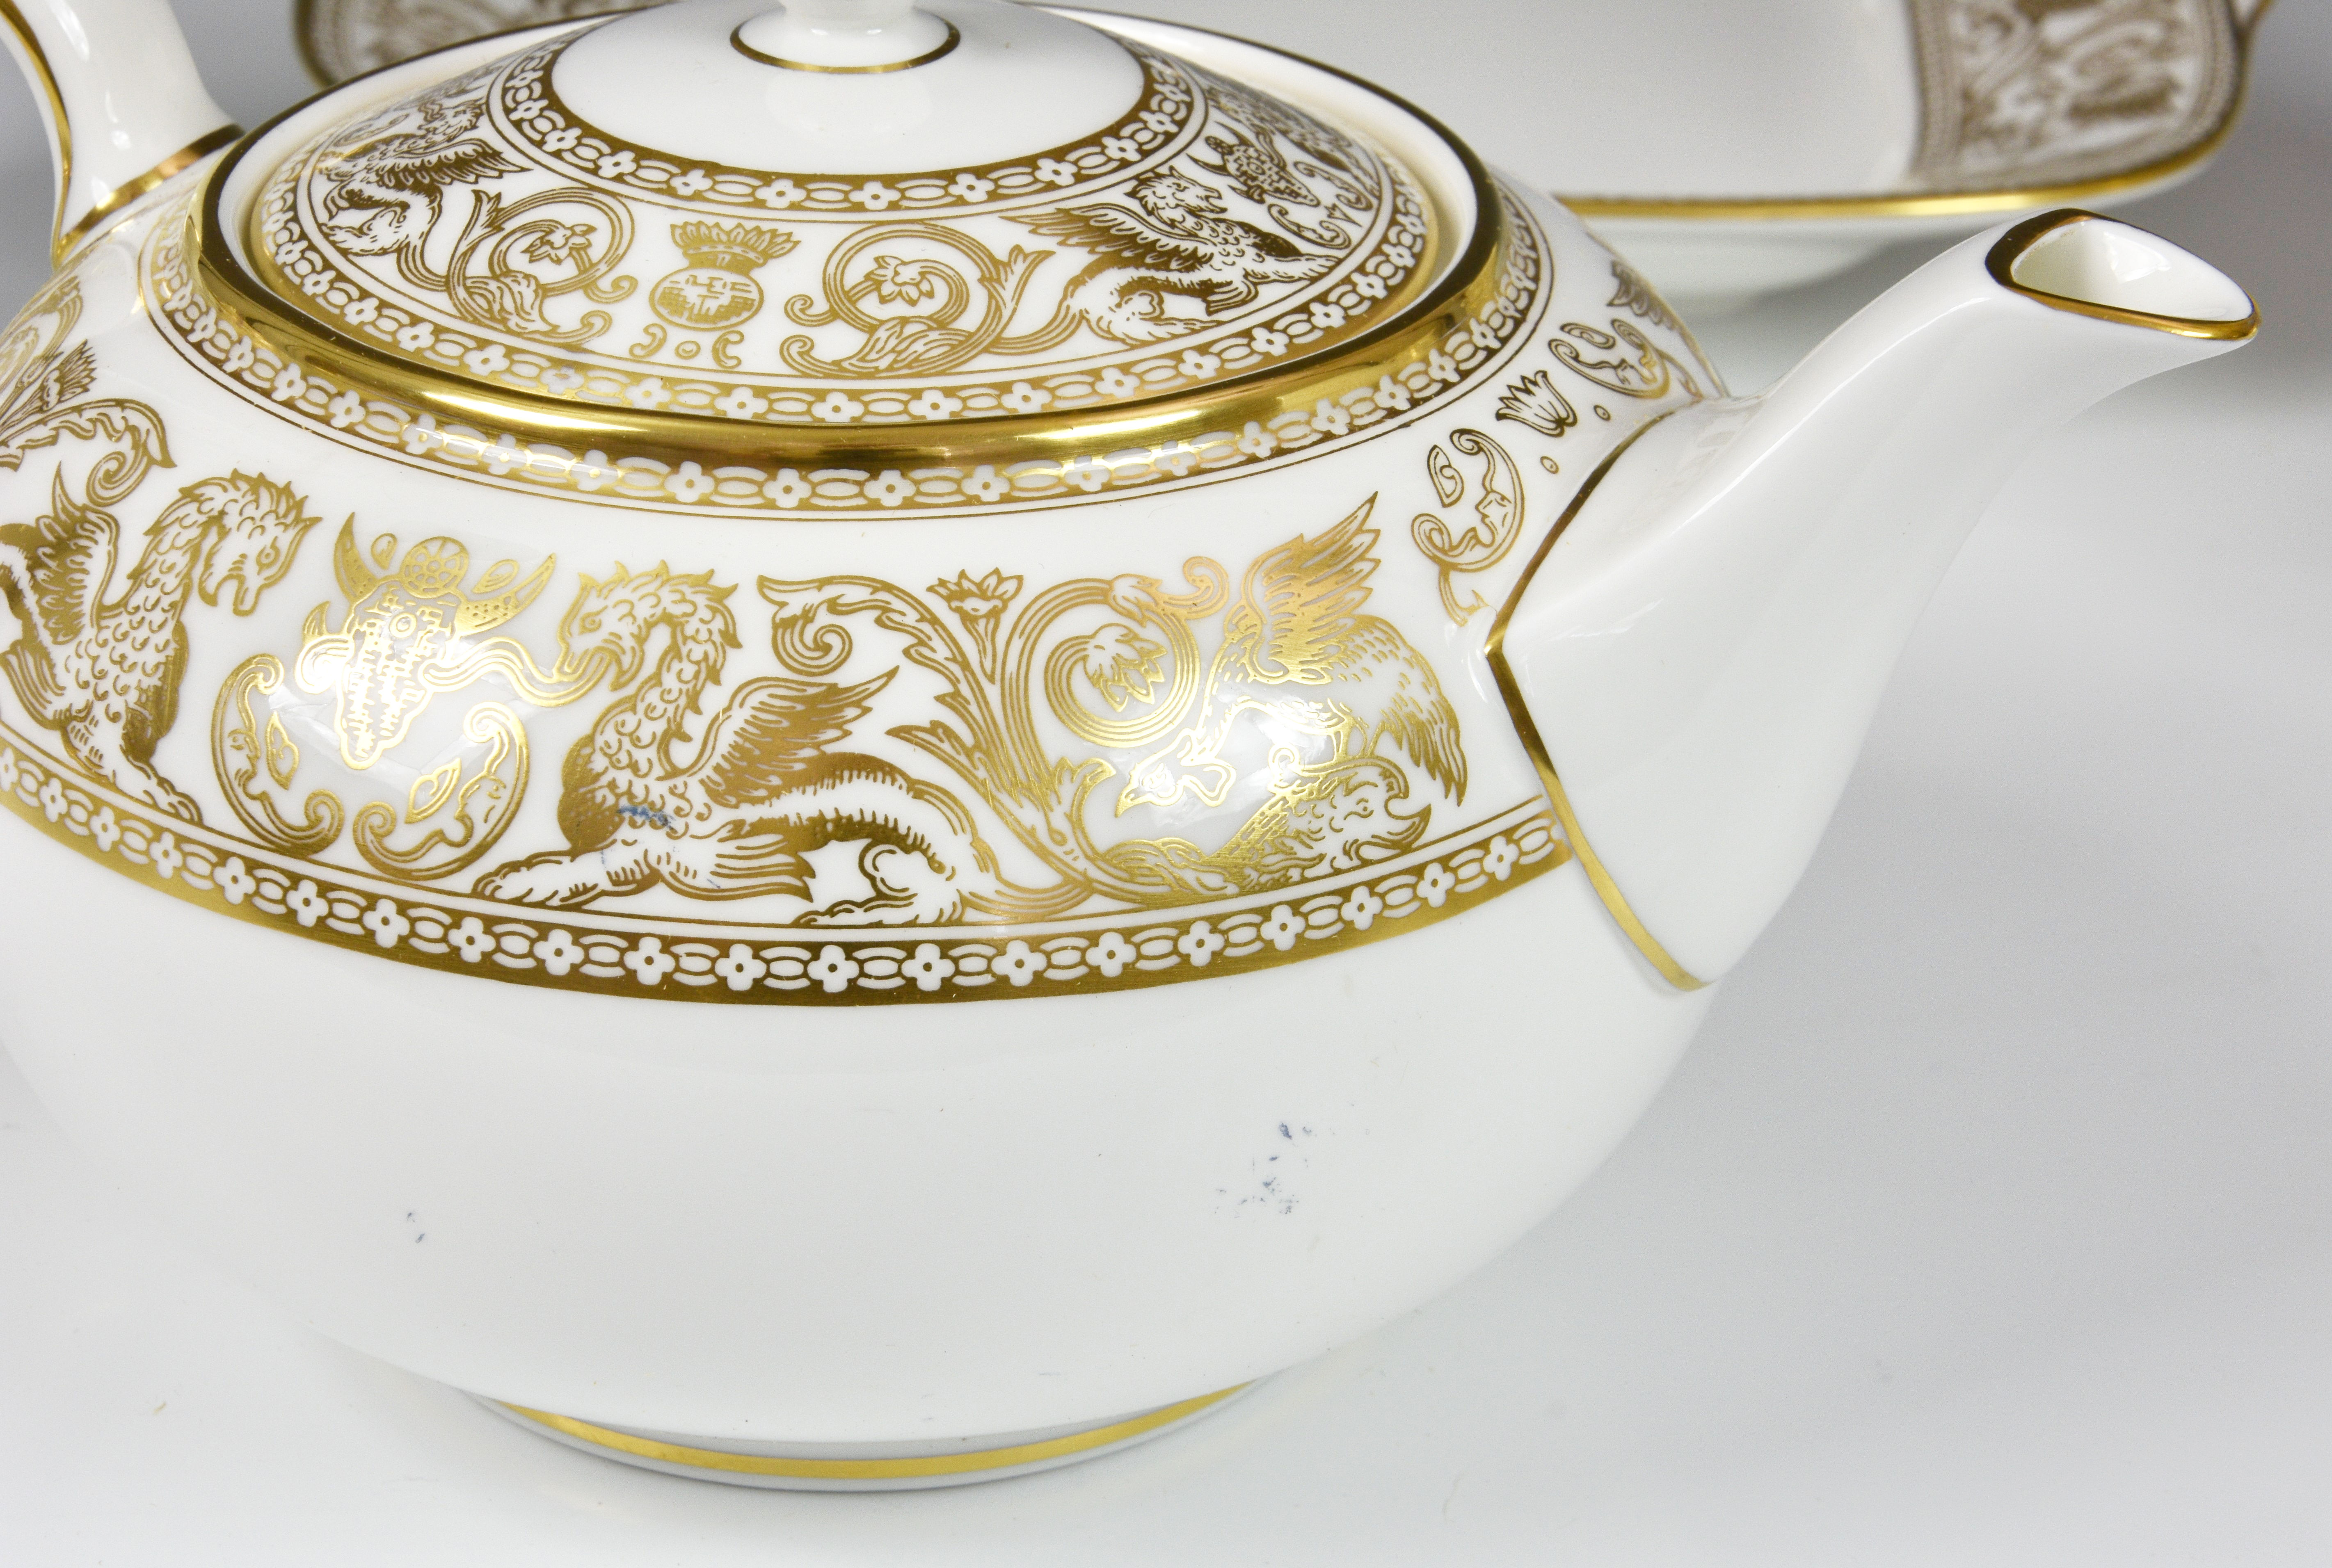 A Wedgwood China 'Gold Florentine' pattern tea service, comprising of teapot, six cups & saucers, - Image 4 of 6